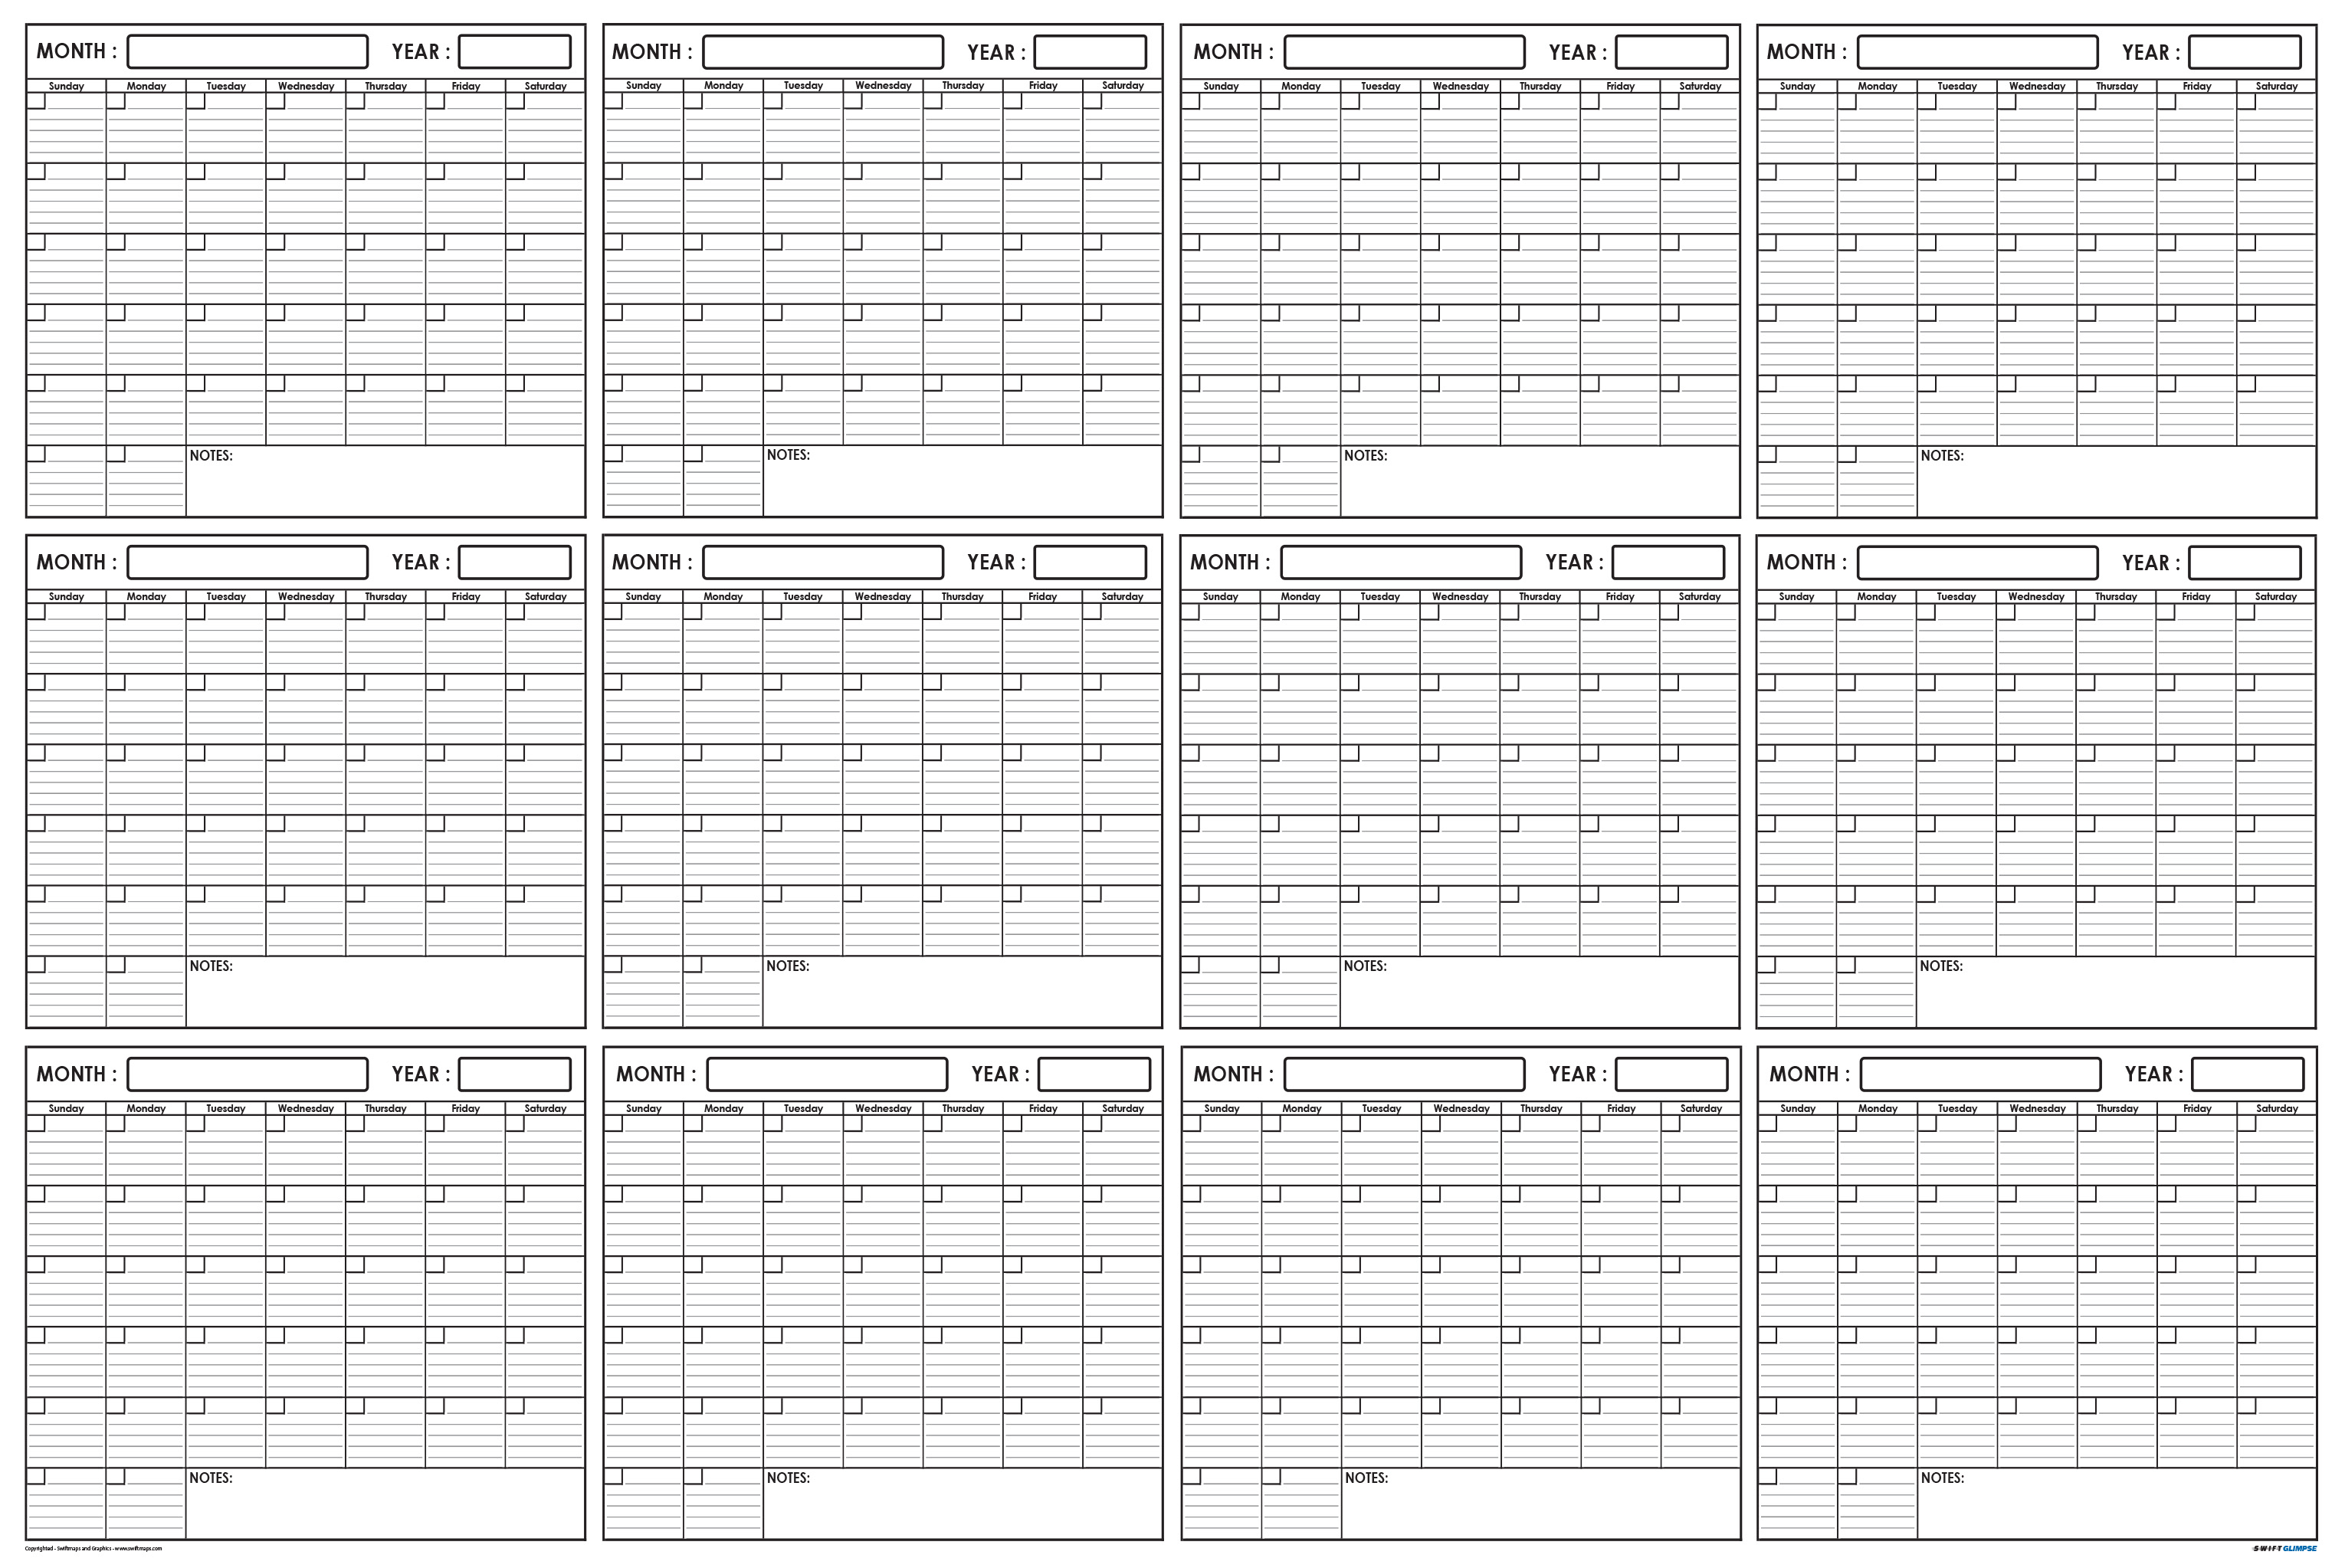 Xlarge Yearly Wet &amp; Dry Erase Blank Reusable Undated Wall Calendar Planner  For Office Academic Home 12-Month Project Calendar